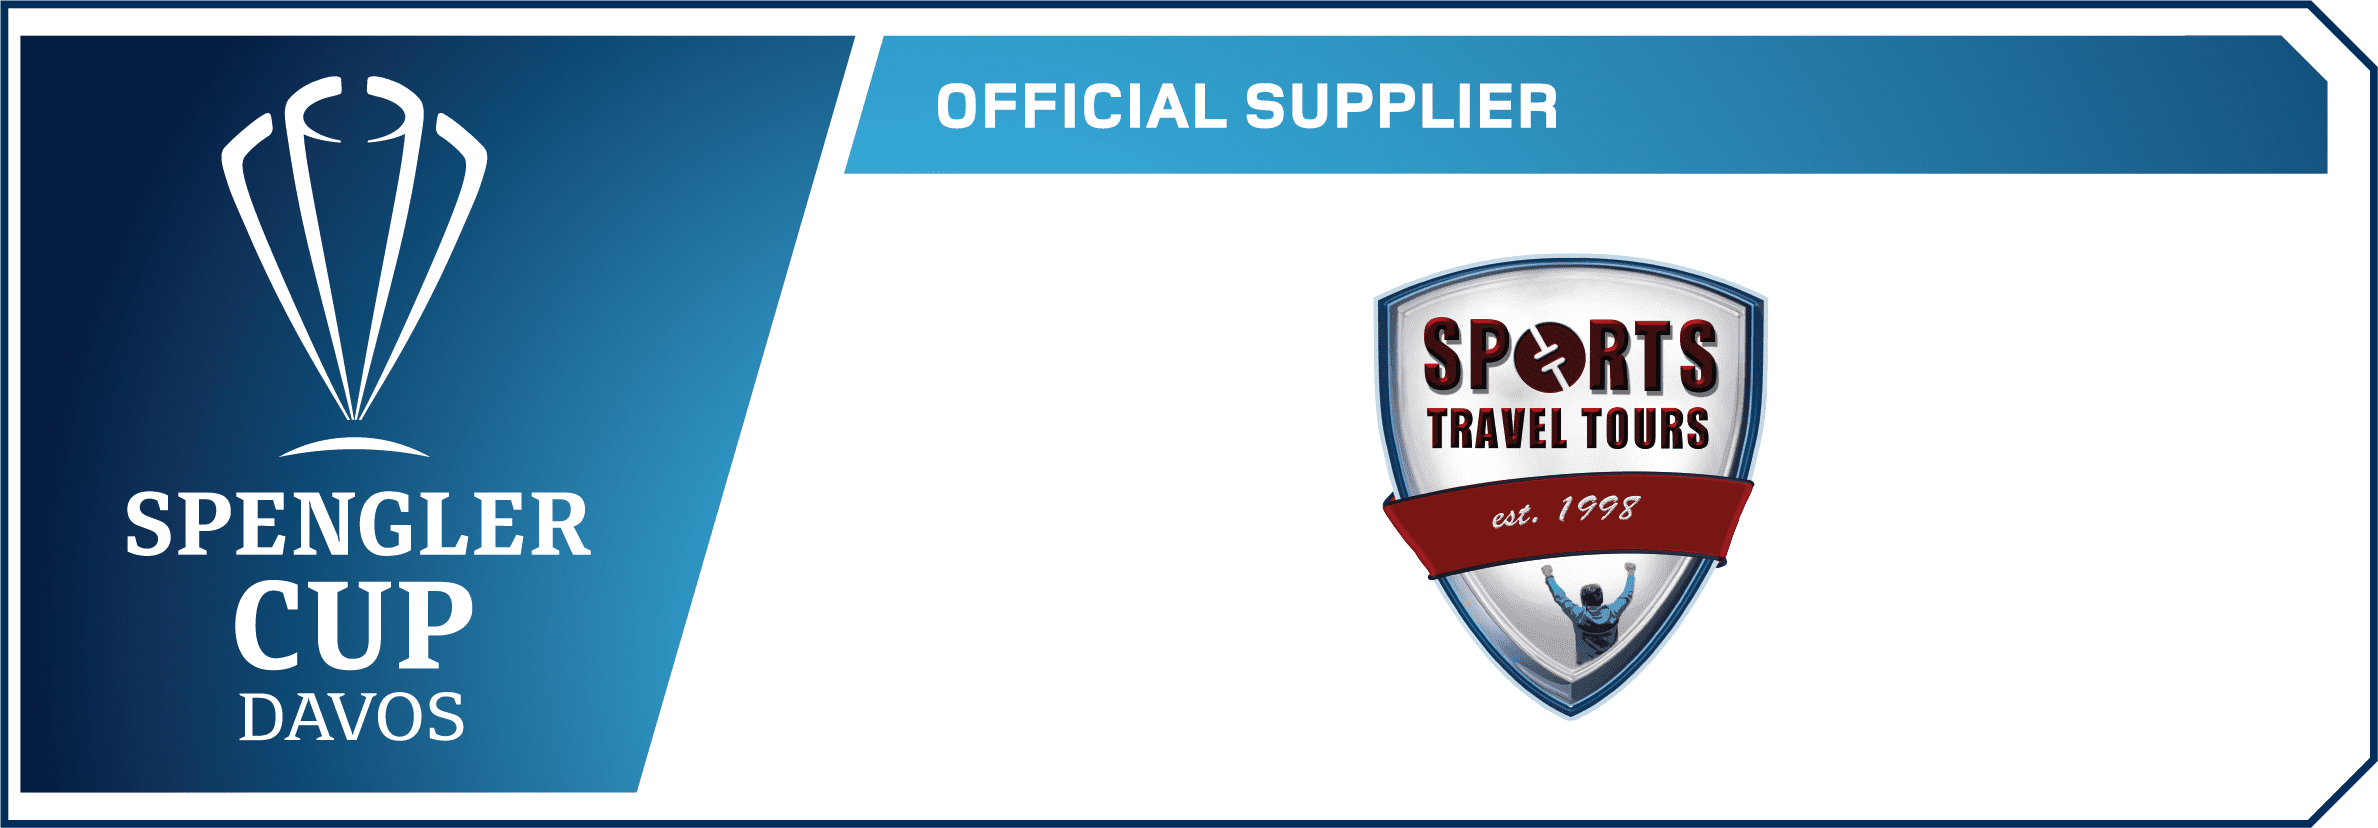 Sports Travel Tours Spengler Cup